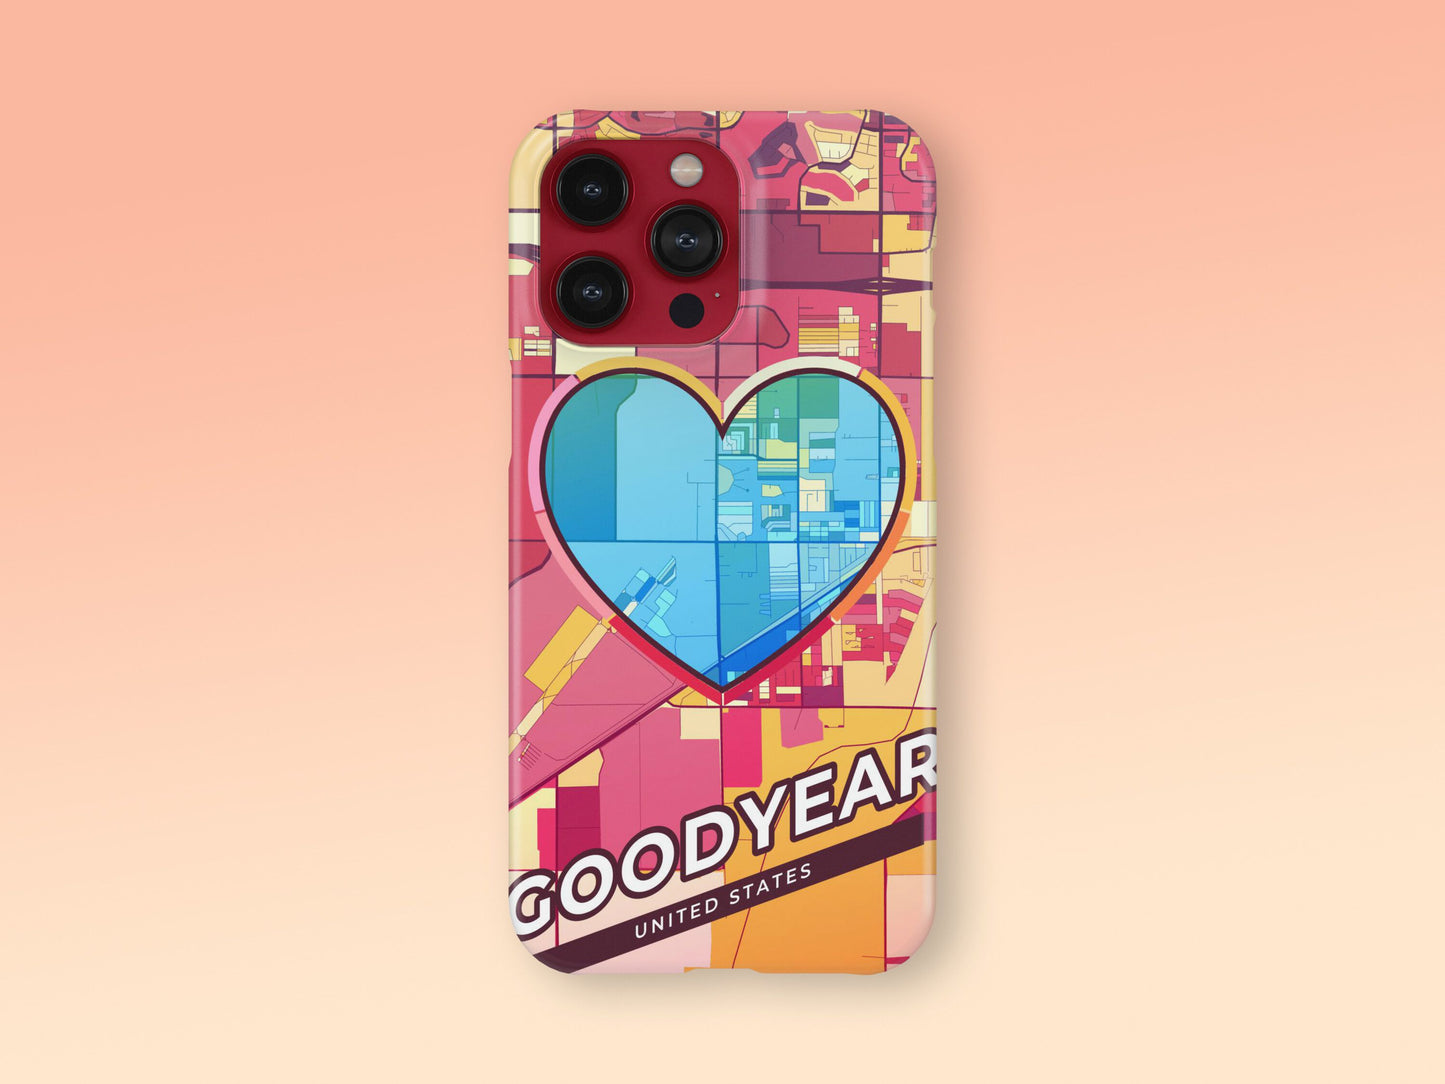 Goodyear Arizona slim phone case with colorful icon. Birthday, wedding or housewarming gift. Couple match cases. 2